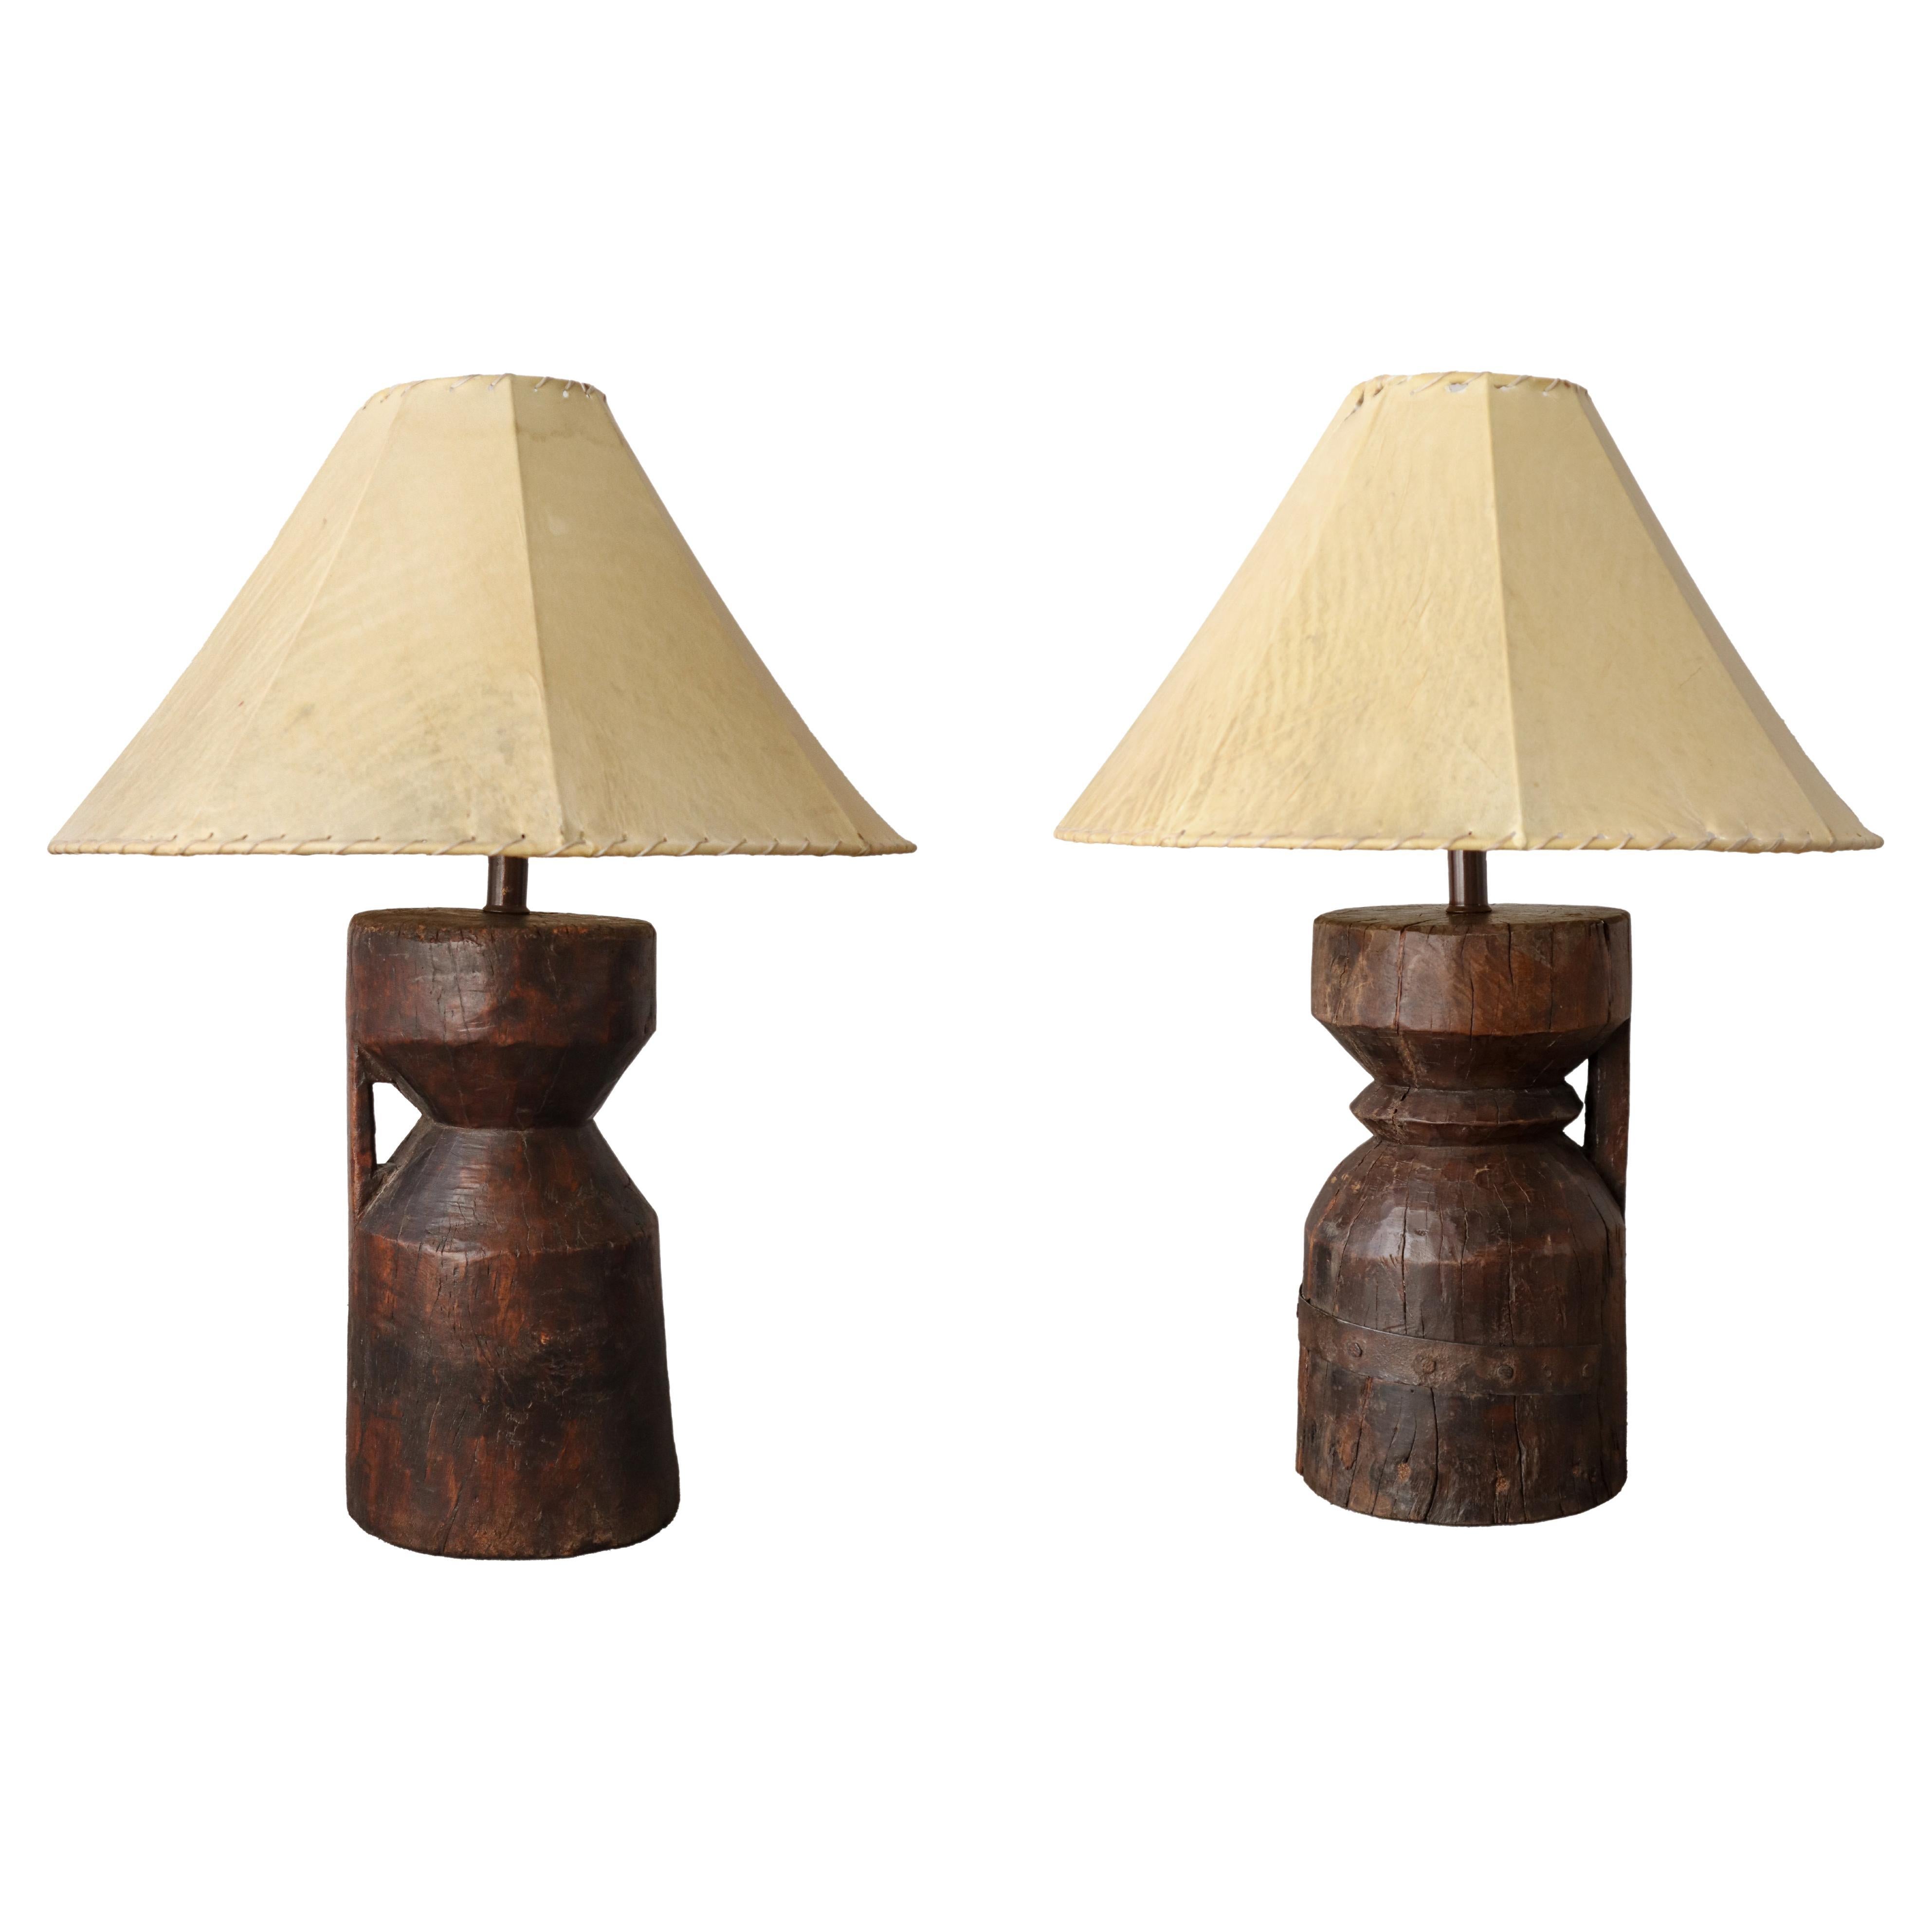 Pair of Primitive African Carved Wood Table Lamps